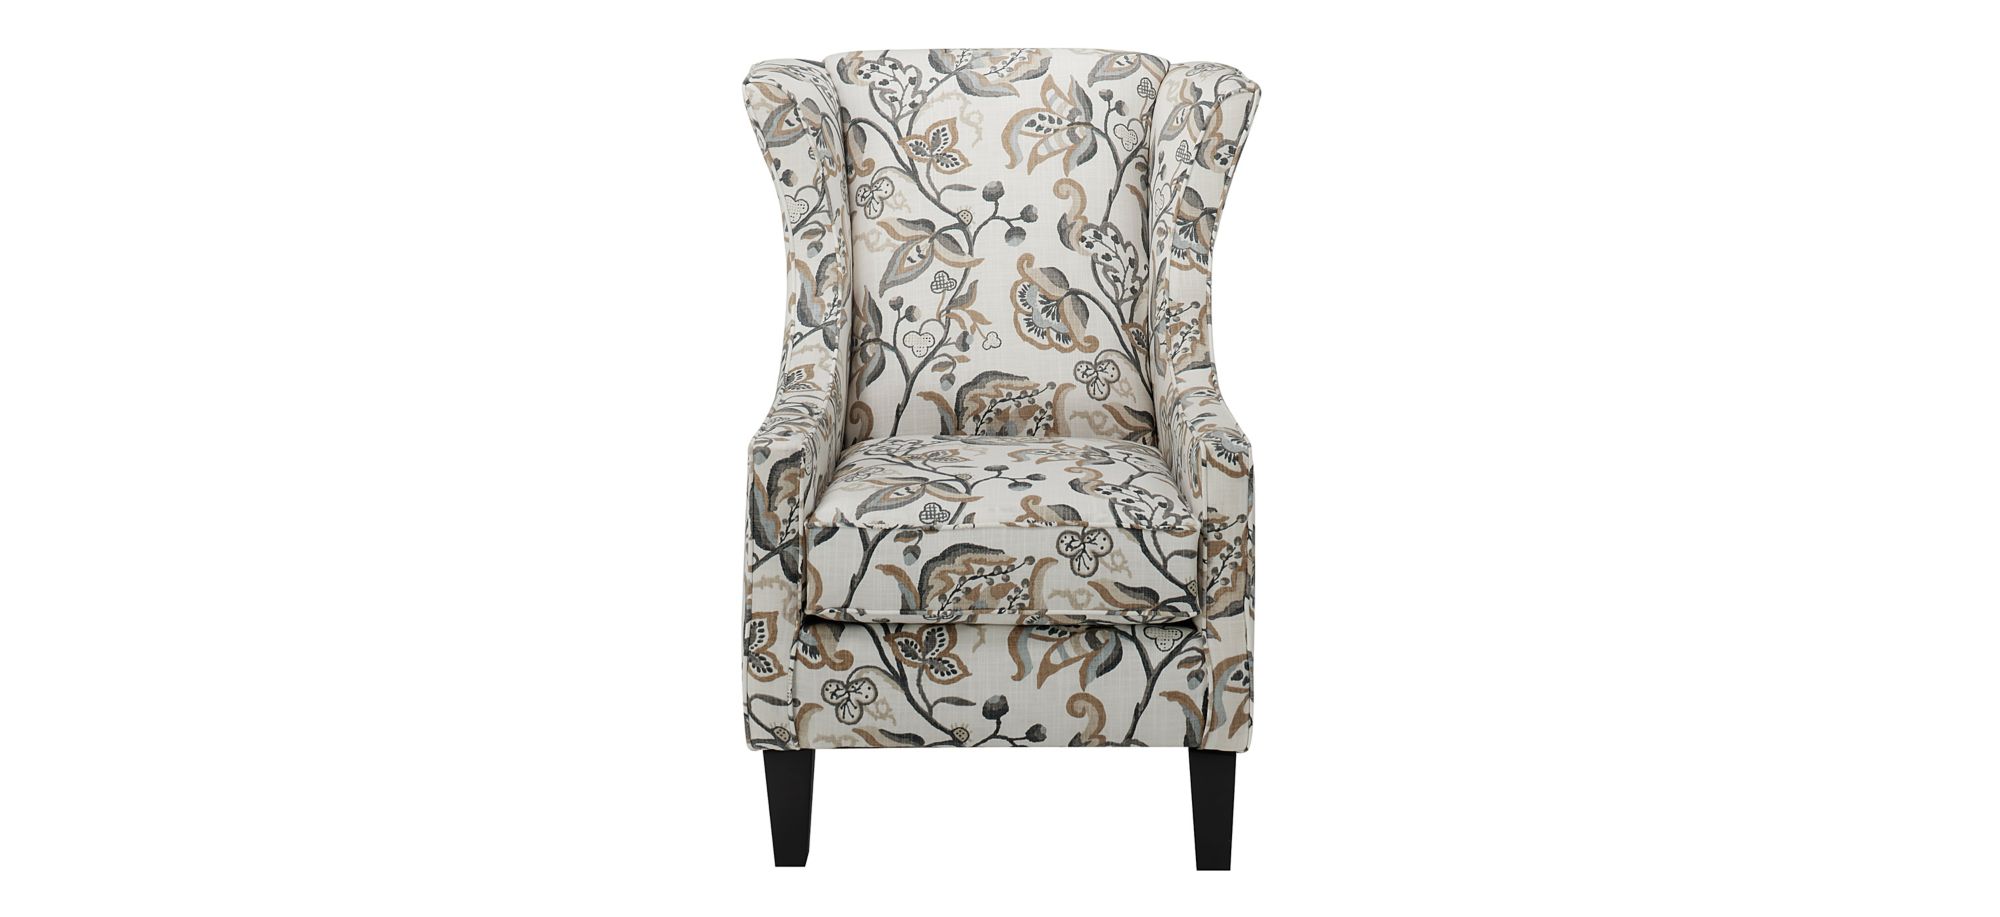 Renville Accent Chair in Multi by Chairs America